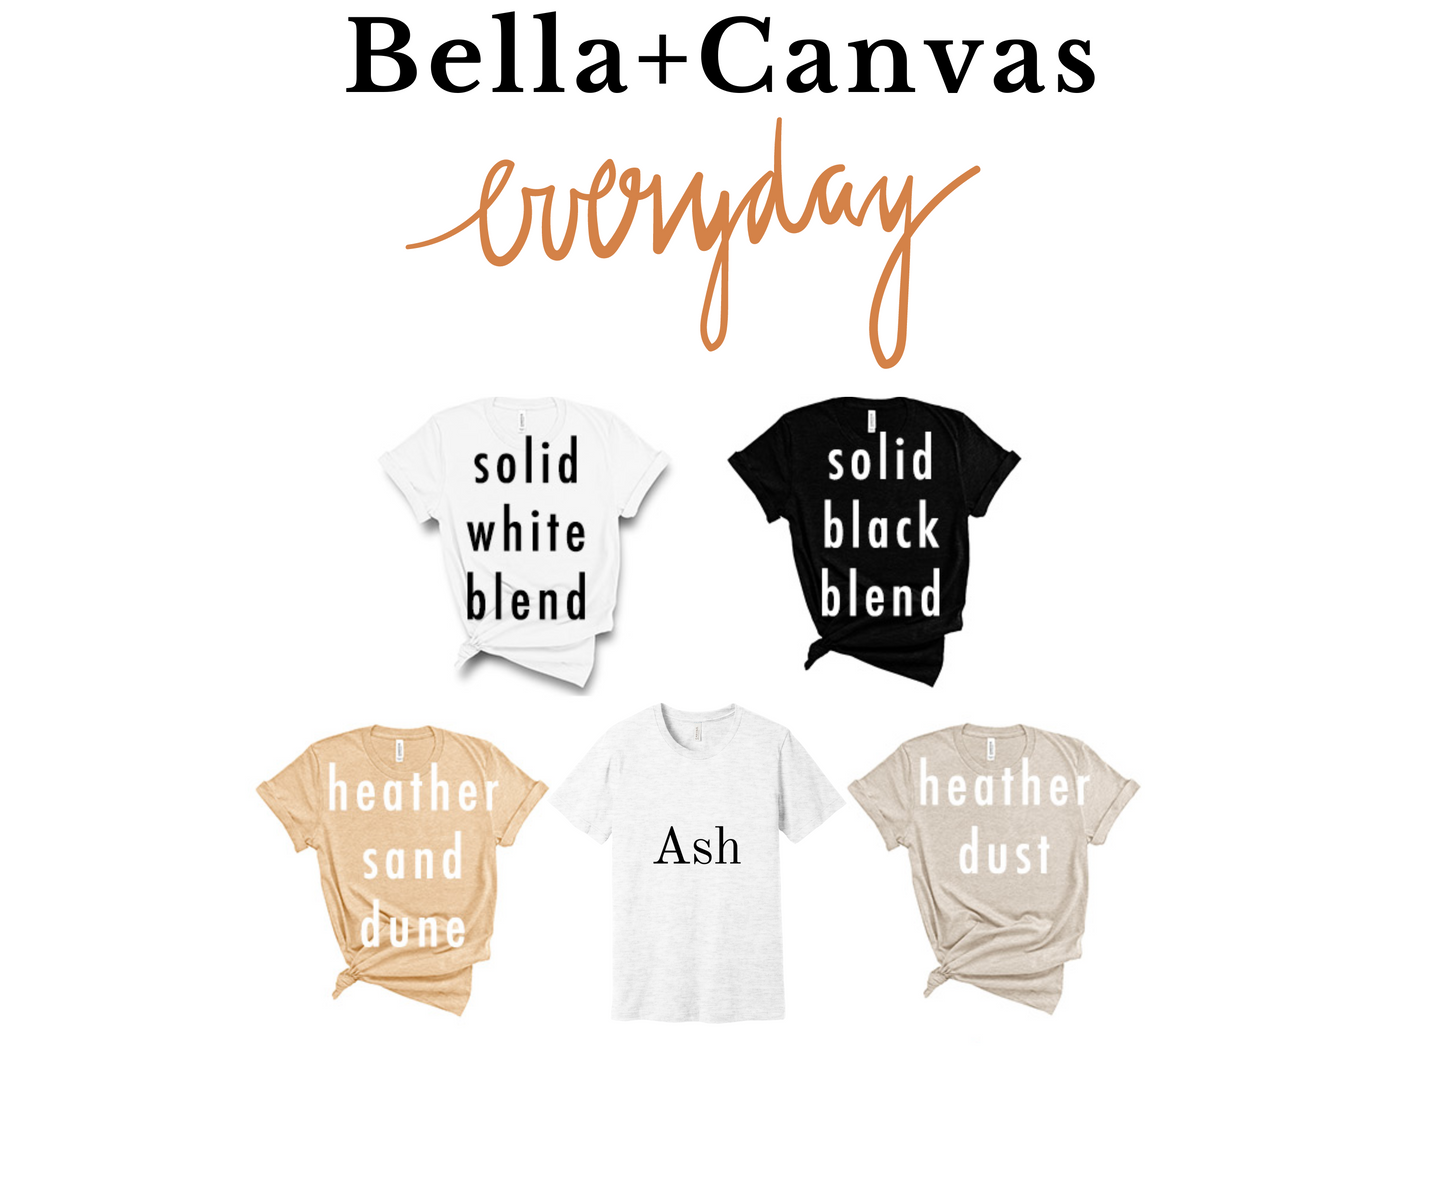 Always Stay Humble and Kind Bella Canvas T-shirt